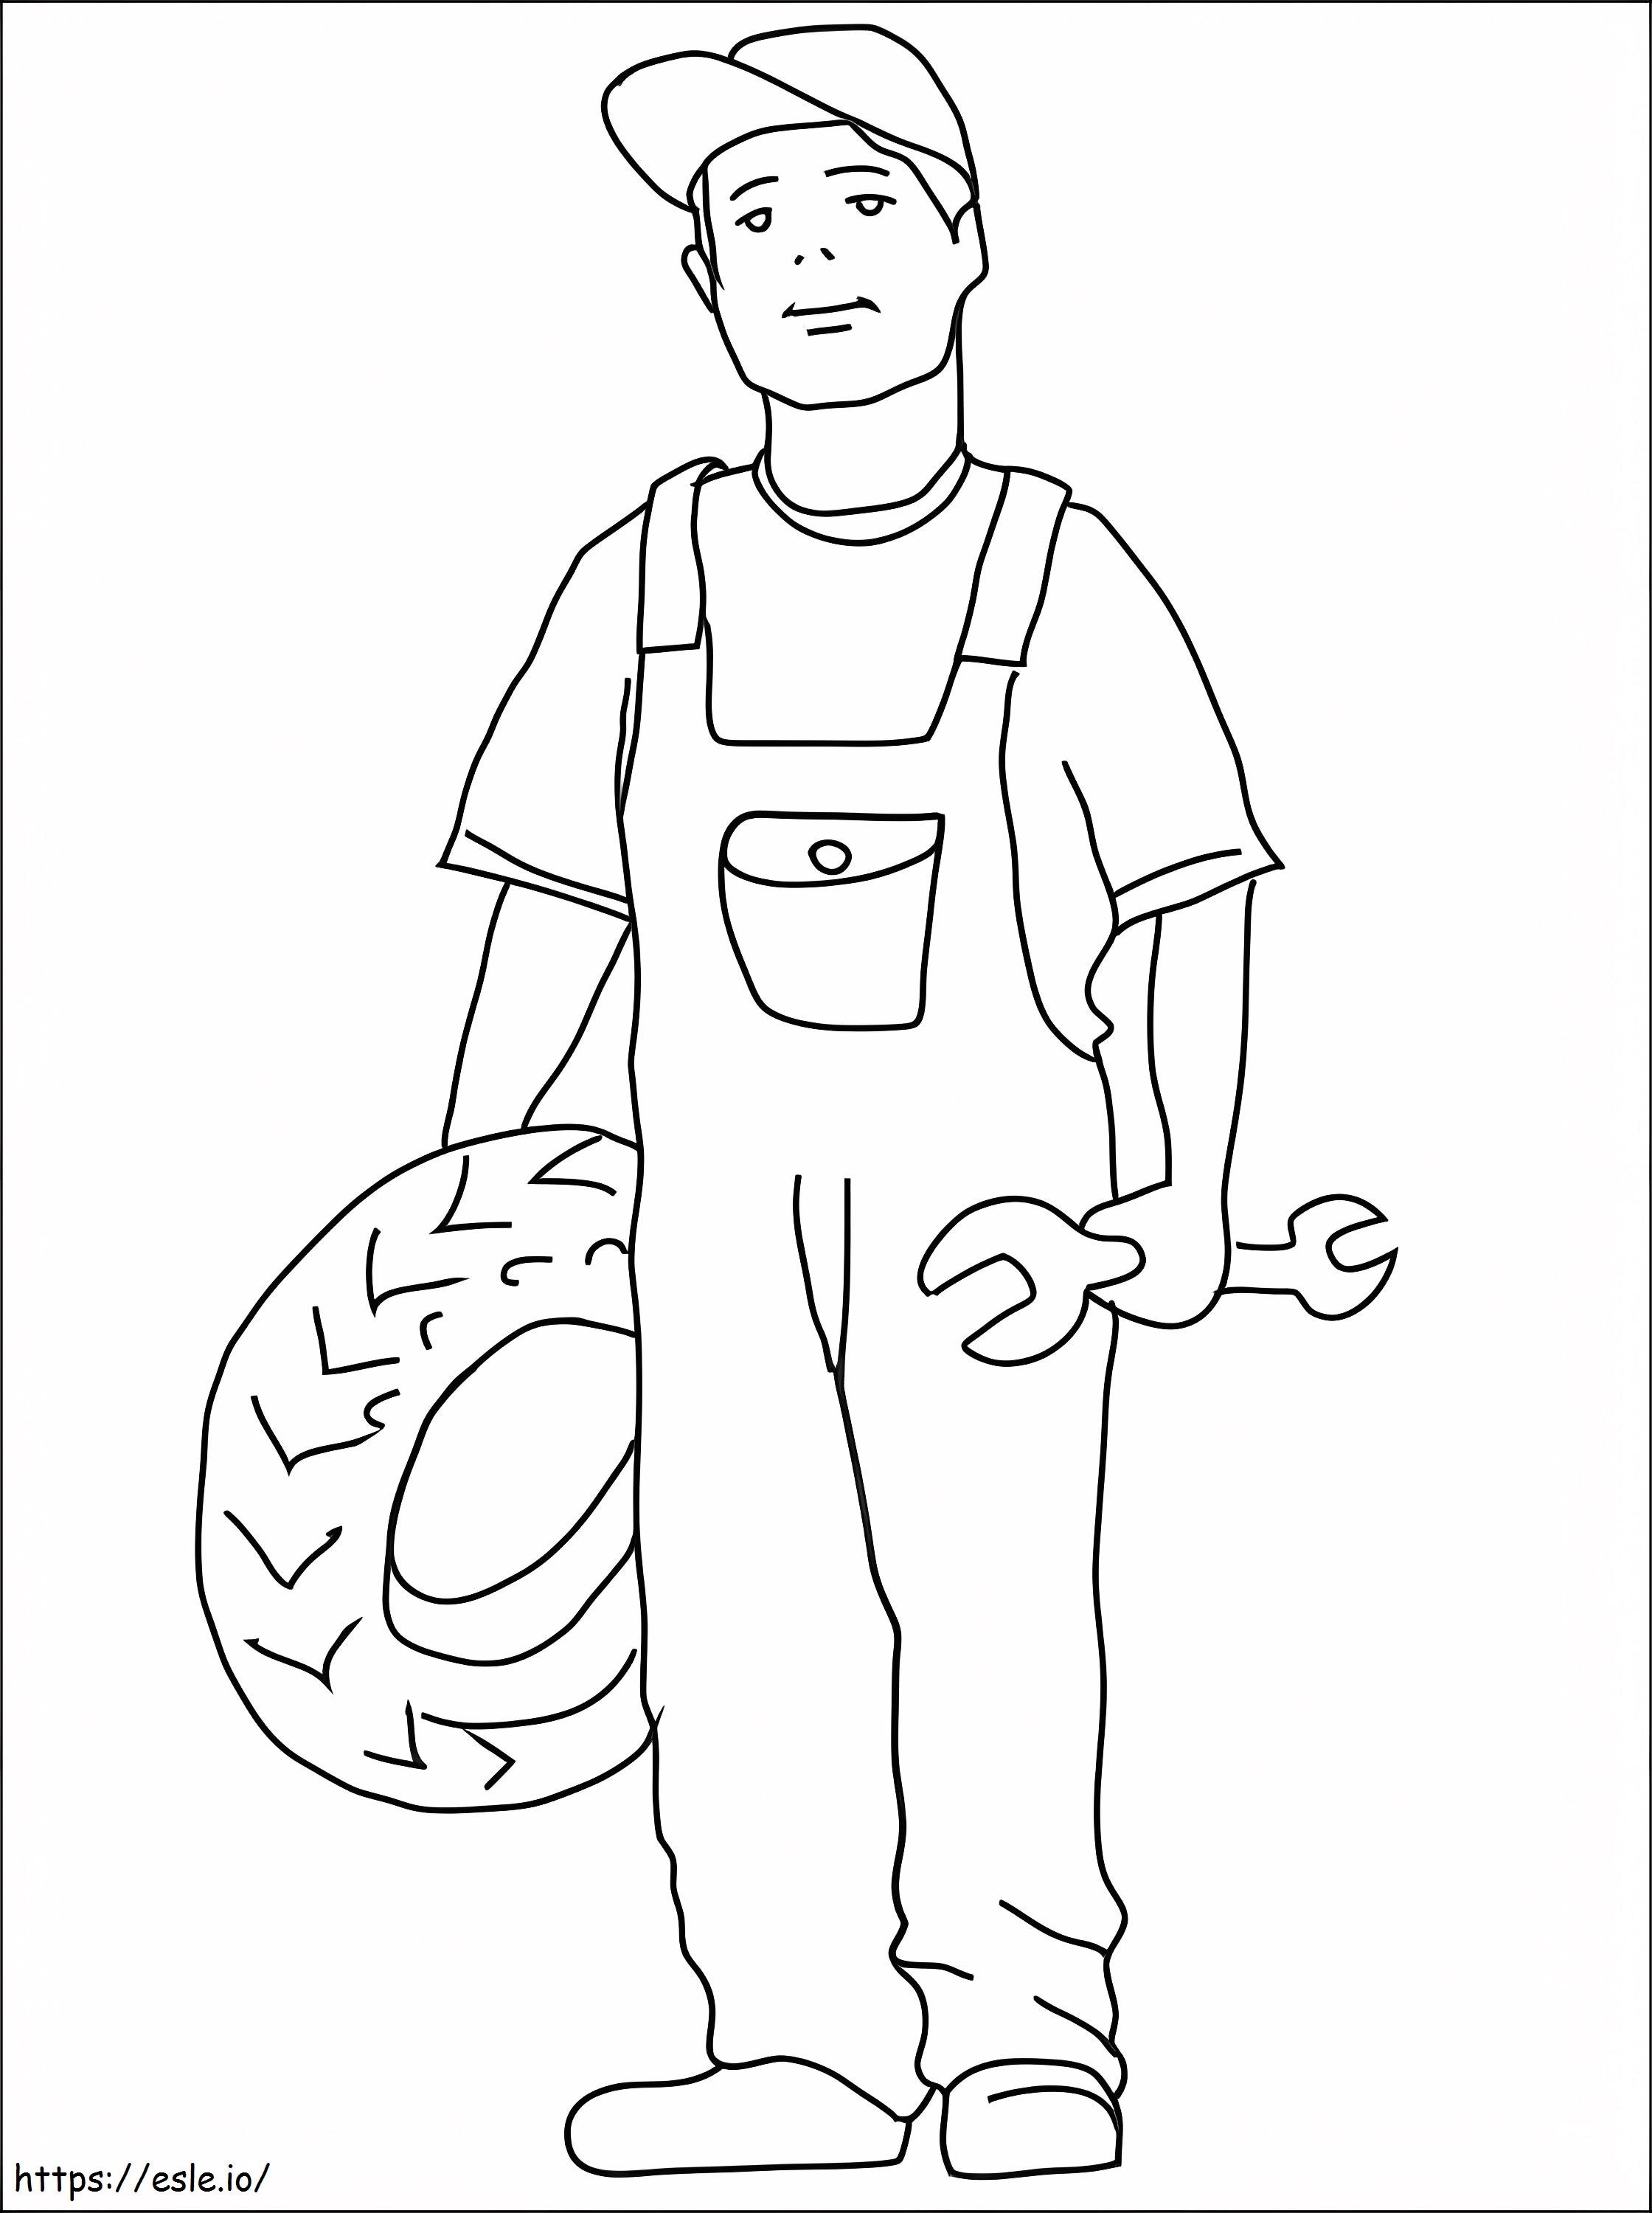 Mechanic 3 coloring page